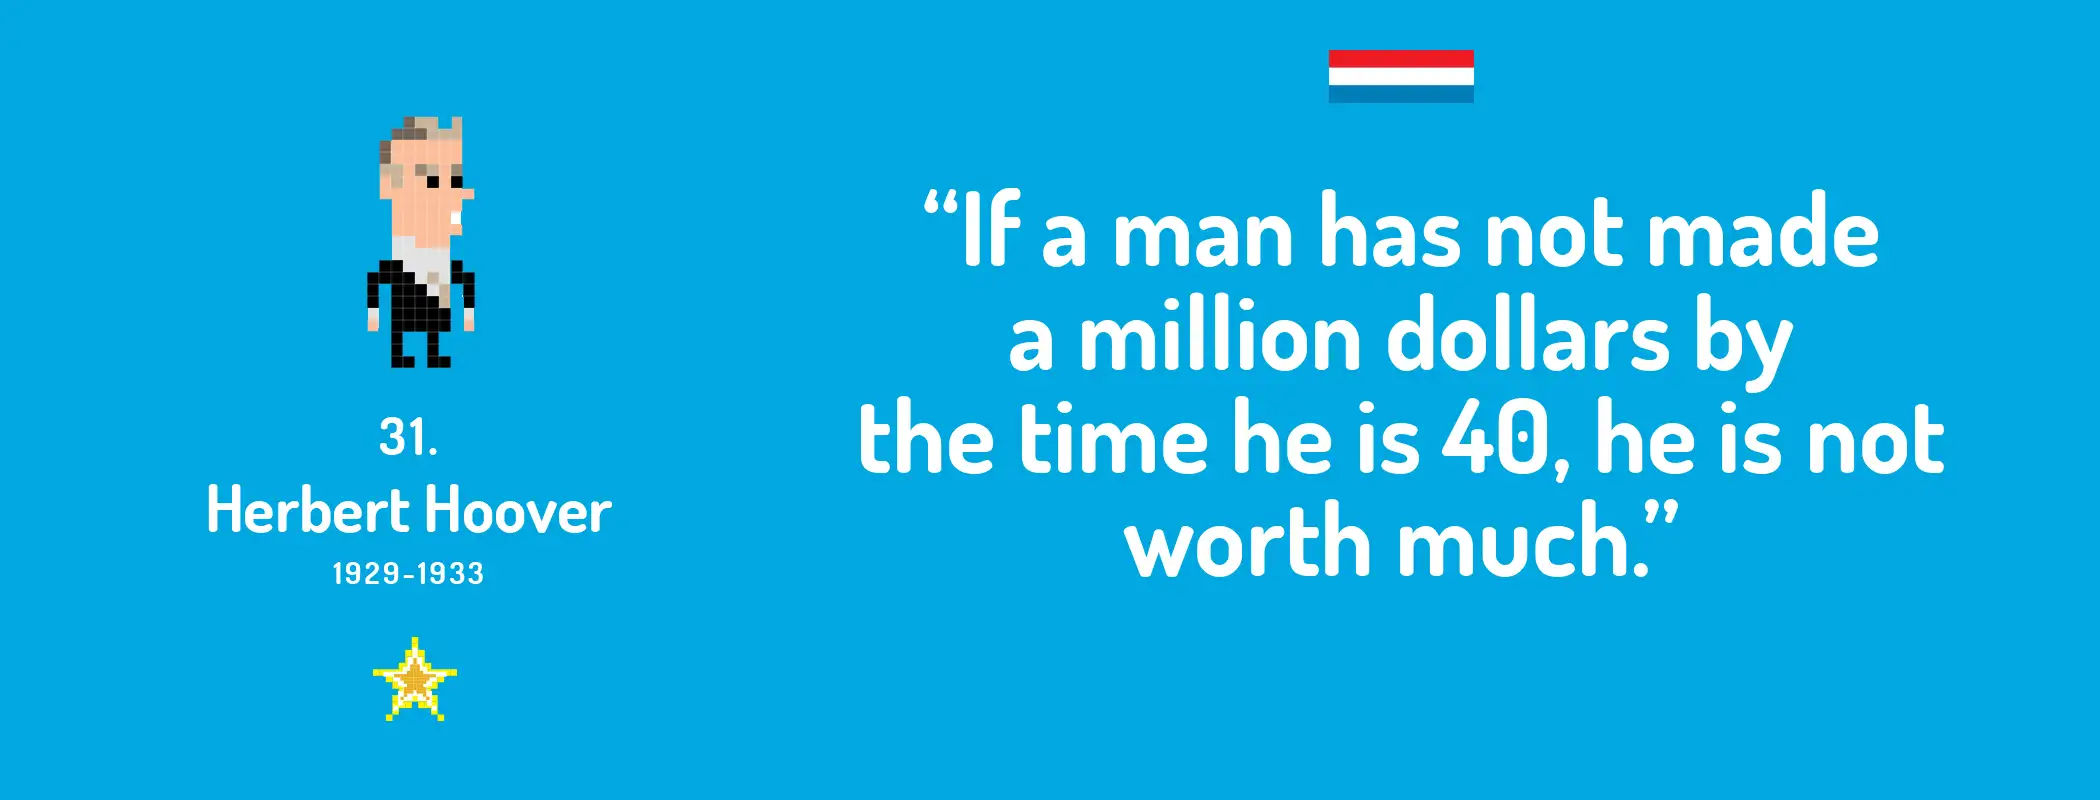 If a man has not made a million dollars by the time he is 40, he is not worth much.